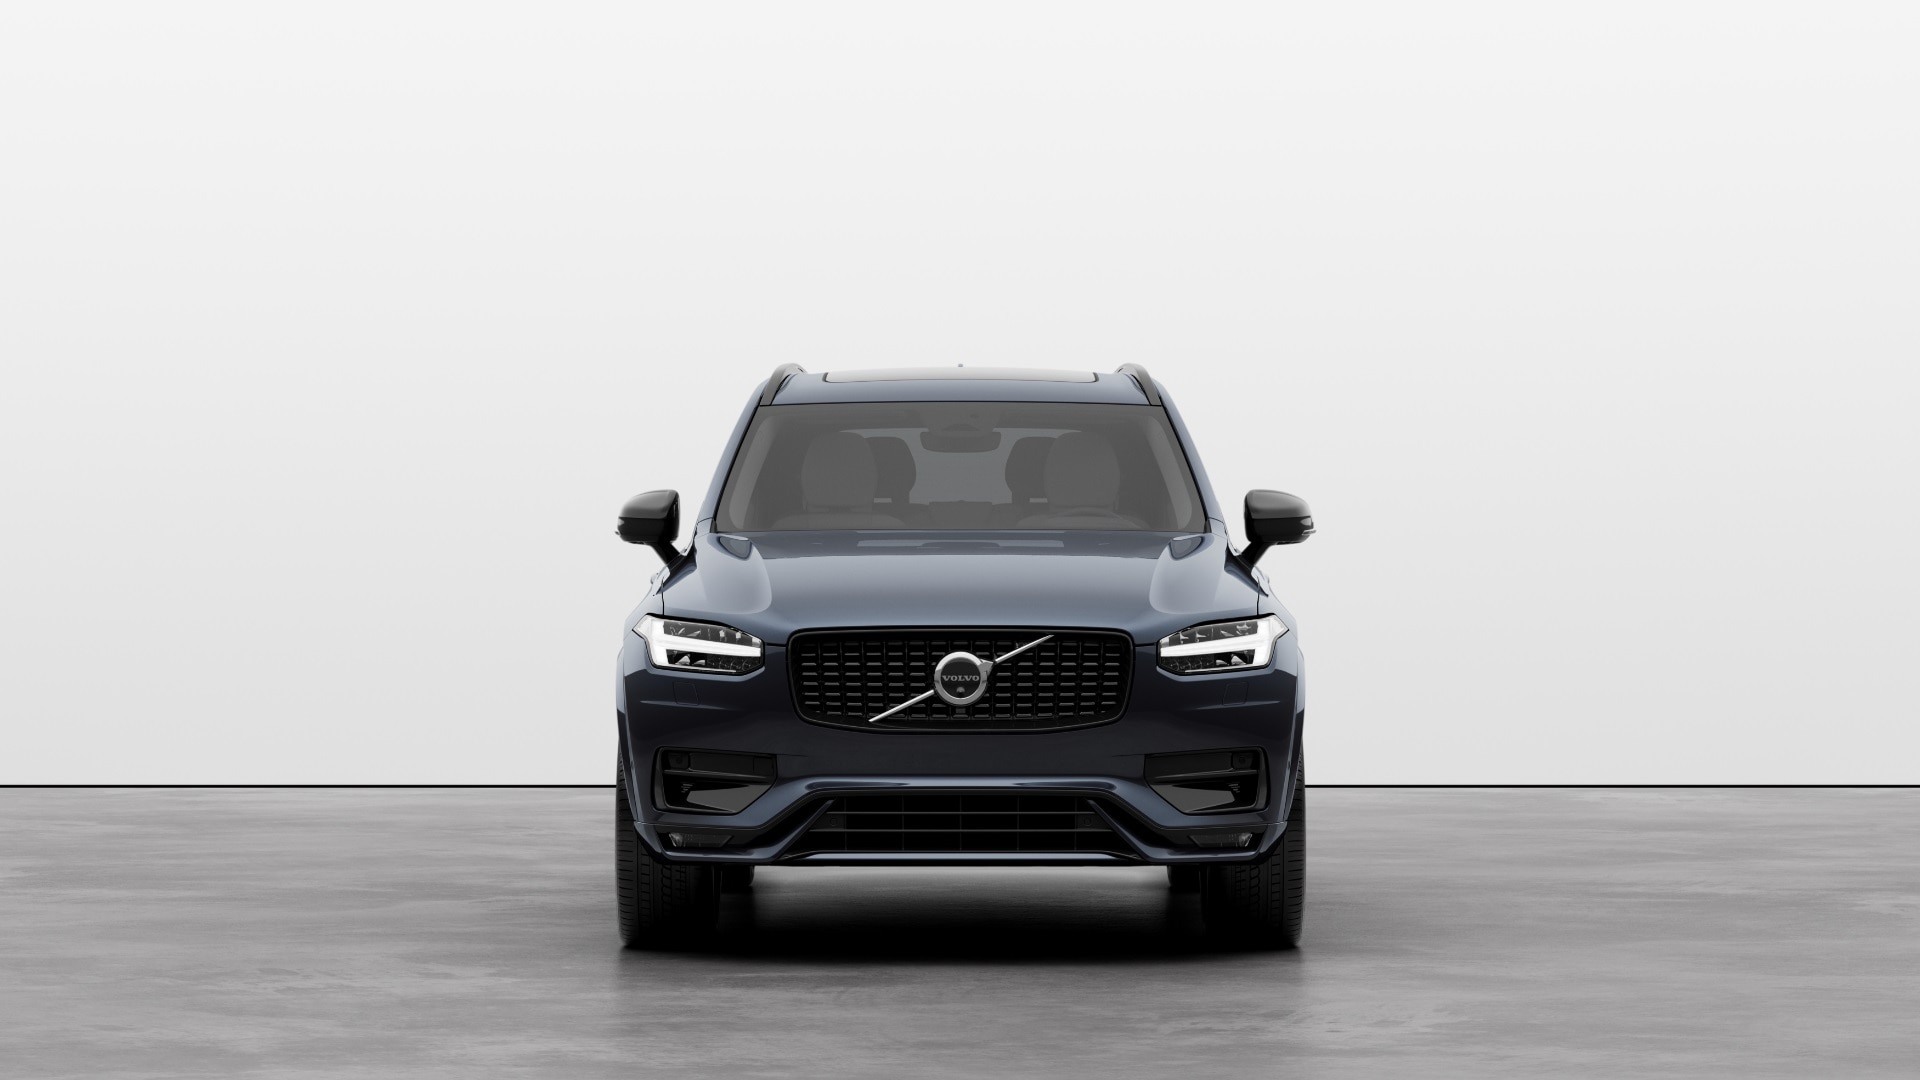  VOLVO XC90 2.0 B6P Ultimate Dark 5dr AWD Geartronic 3164351